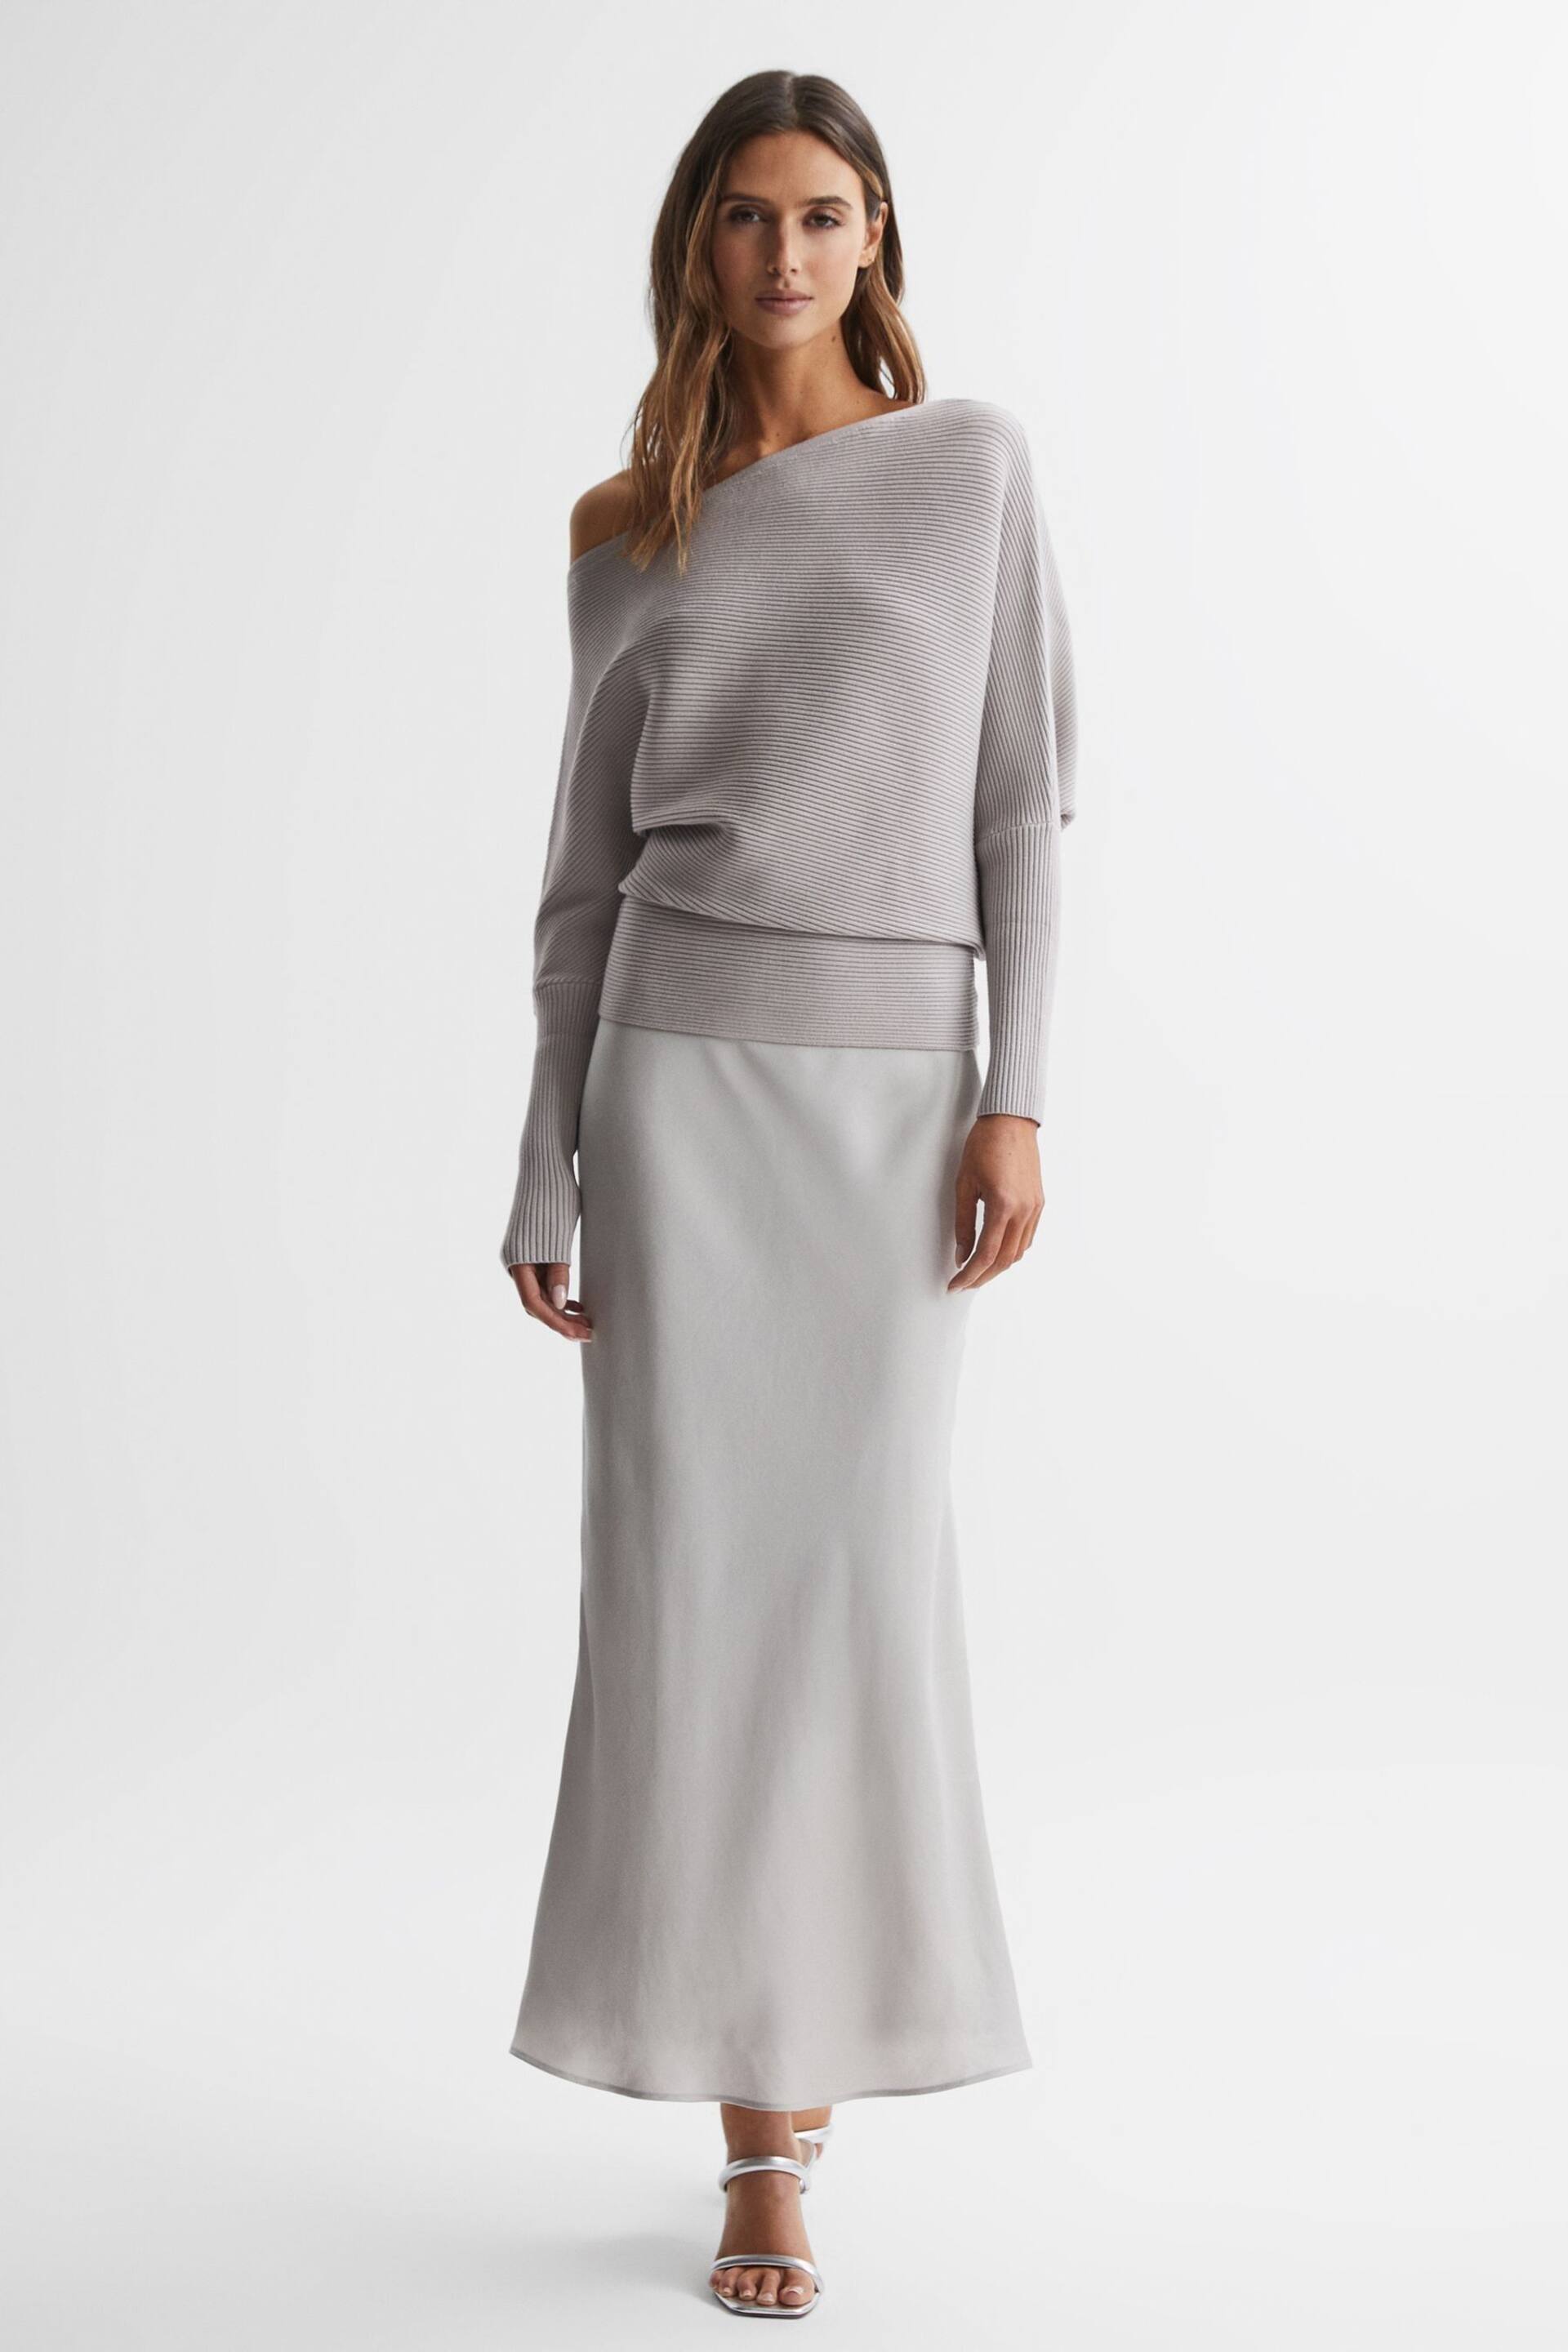 Reiss Grey Lorna Asymmetric Drape Knitted Top - Image 3 of 5